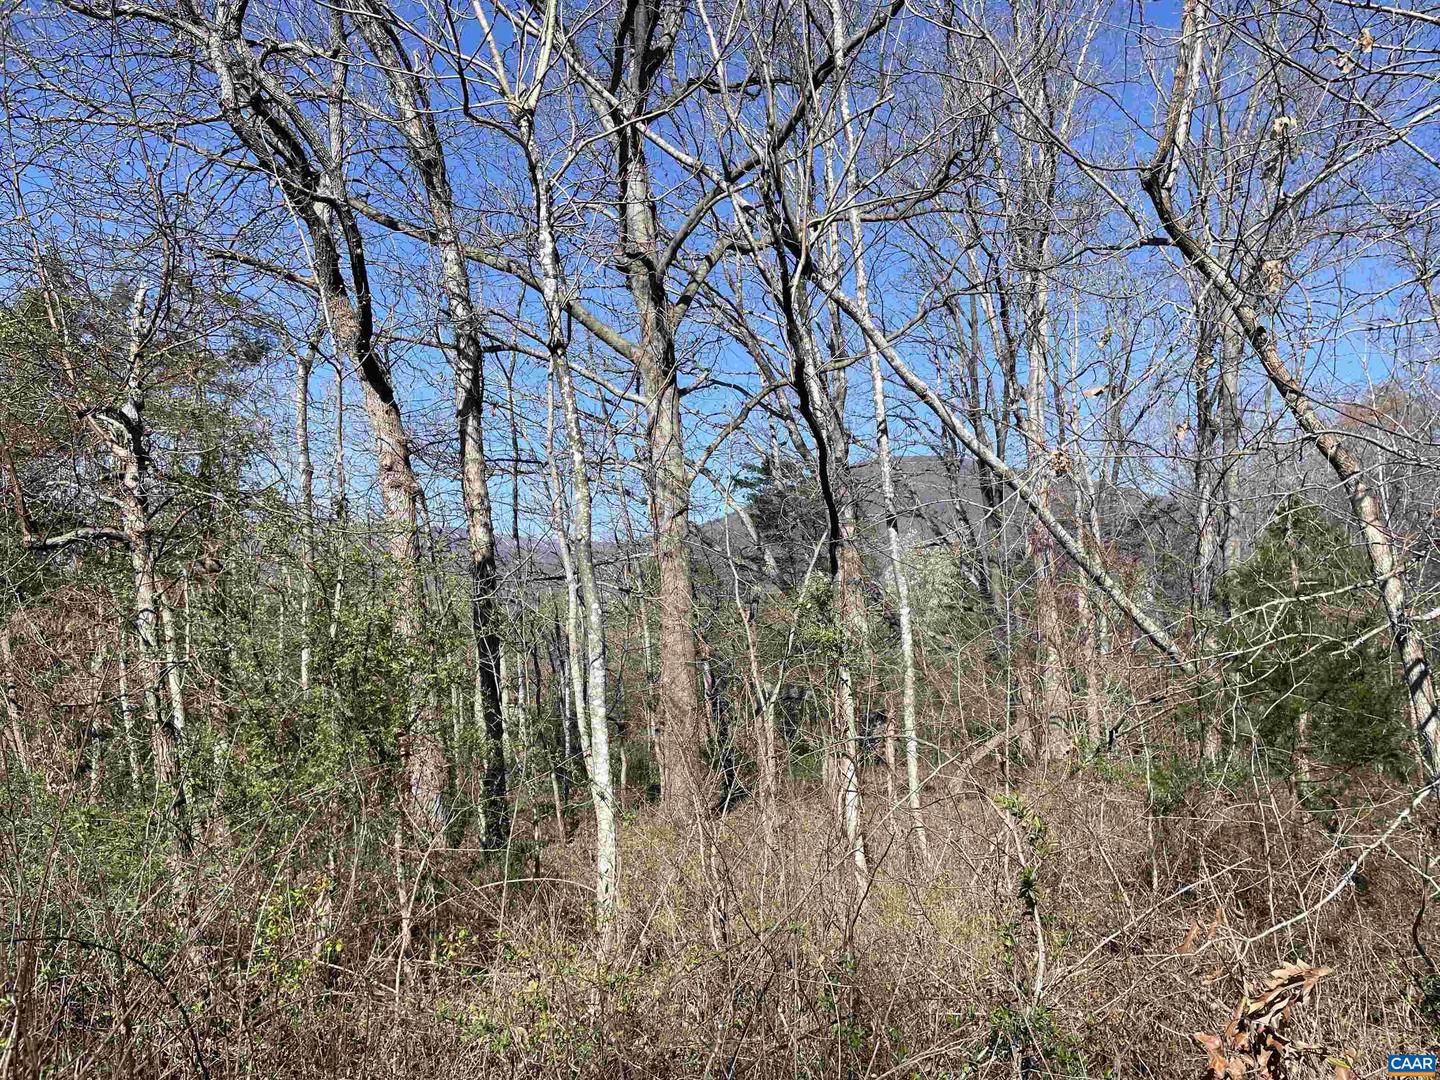 TBD RODES VALLEY DR #4, NELLYSFORD, Virginia 22958, ,Land,For sale,TBD RODES VALLEY DR #4,651042 MLS # 651042